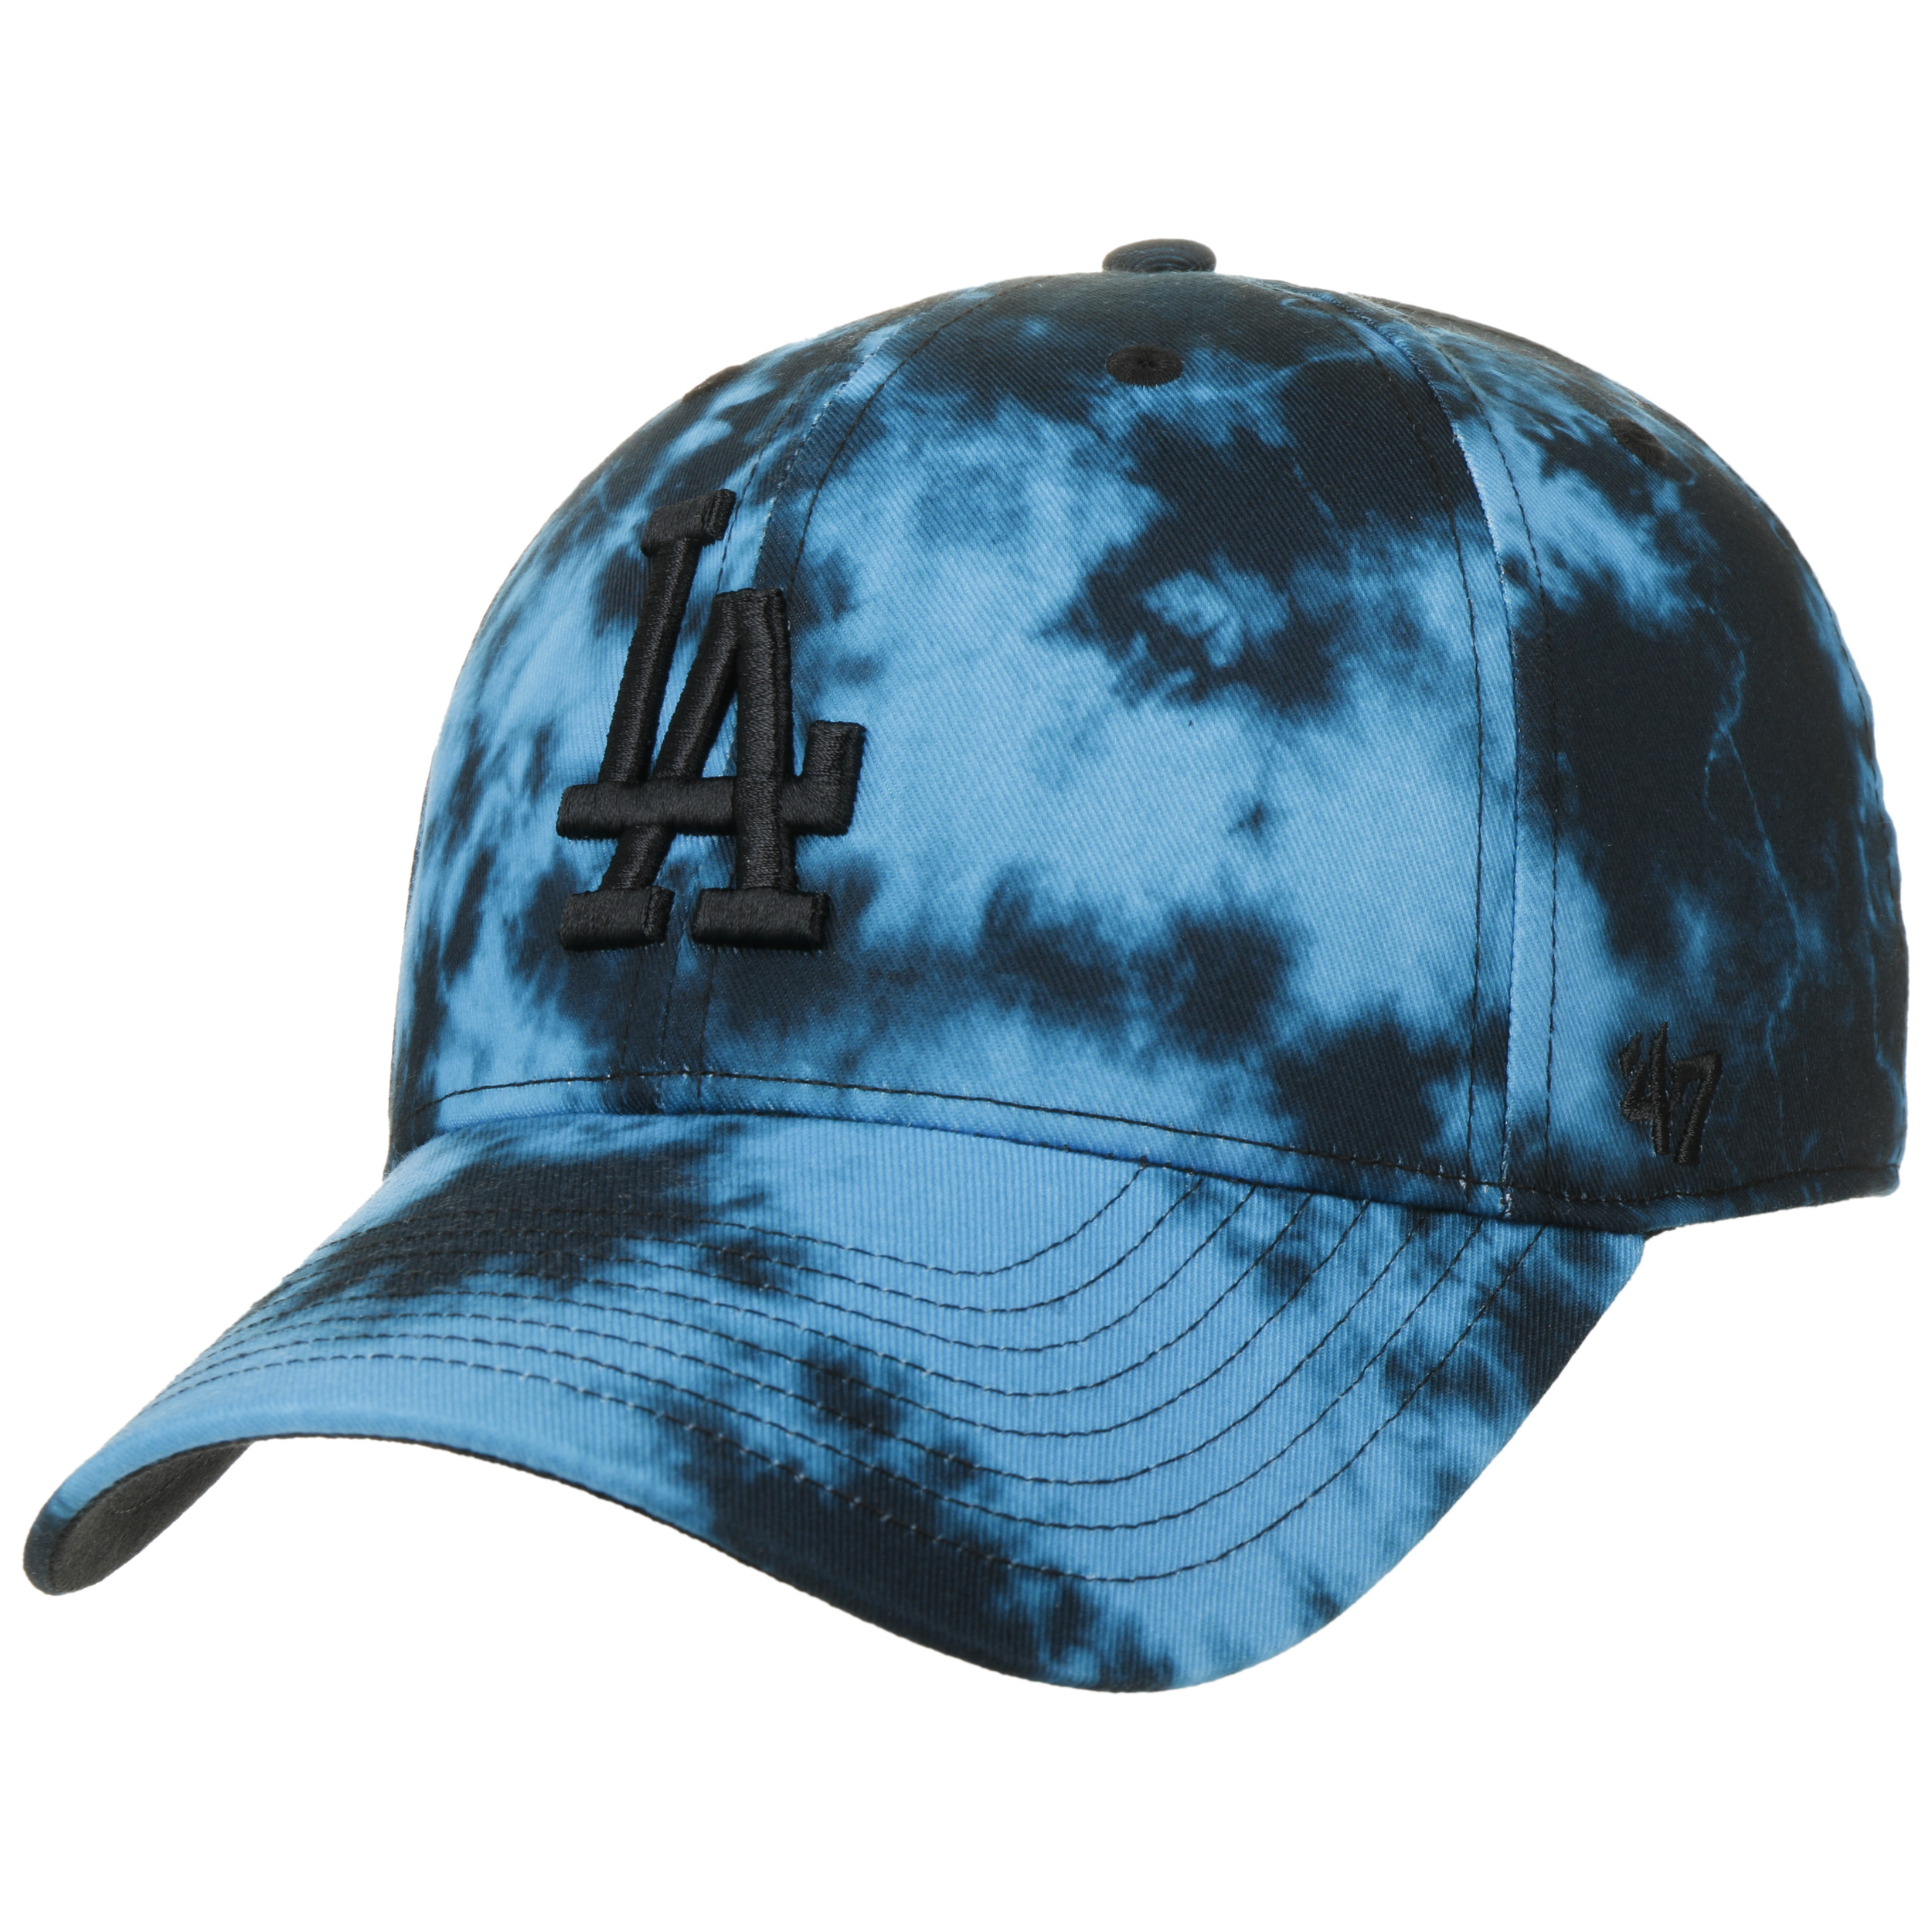 MLB Dodgers Tinted Snapback Cap by 47 Brand